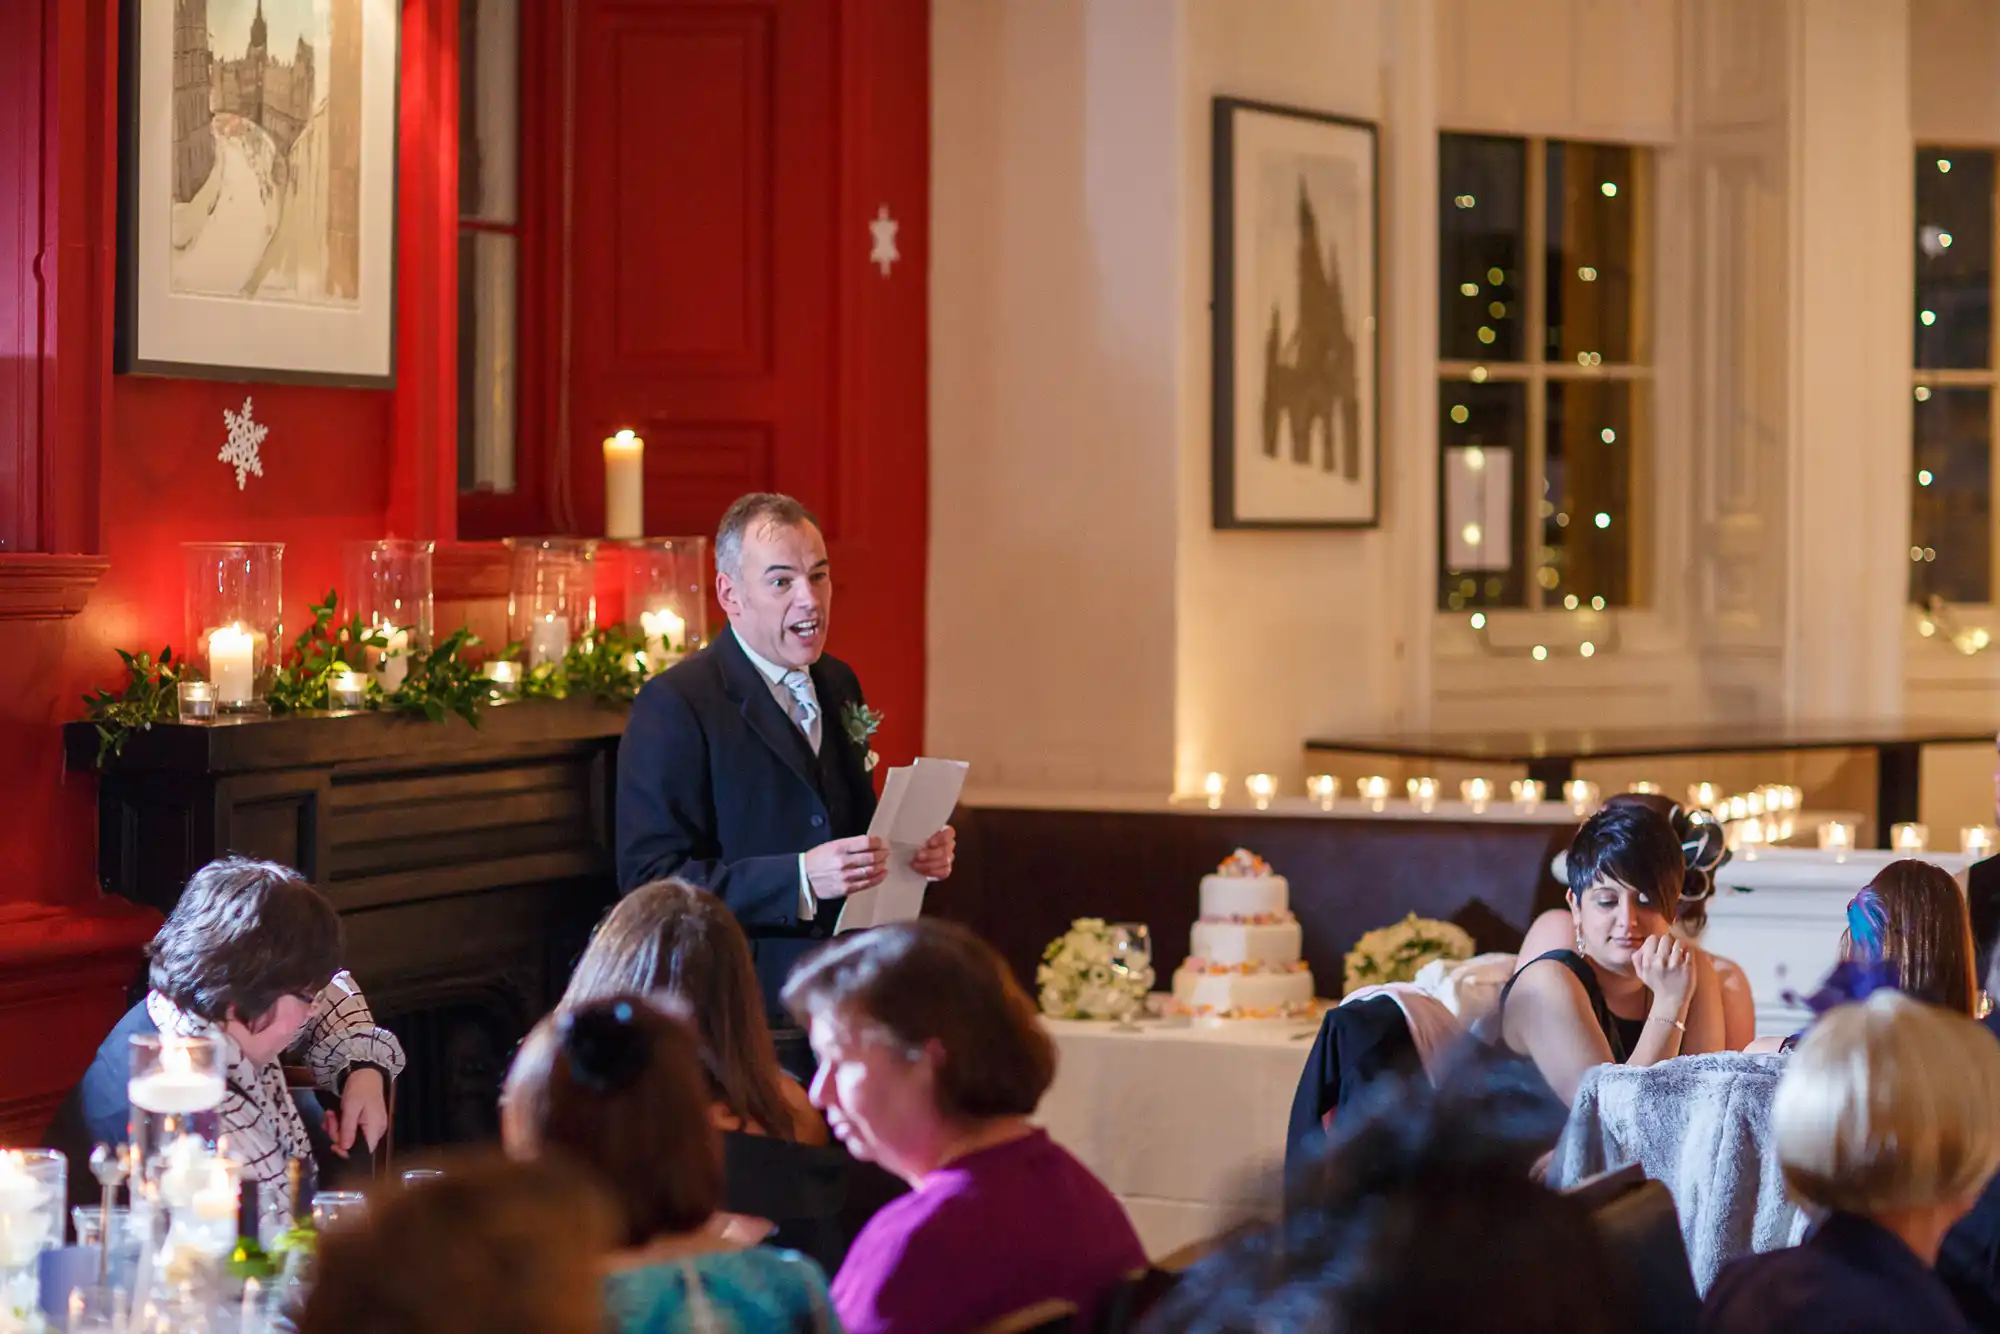 Man giving a speech at a wedding reception, with guests seated around tables and a bride listening intently. the room features festive decorations and ambient lighting.